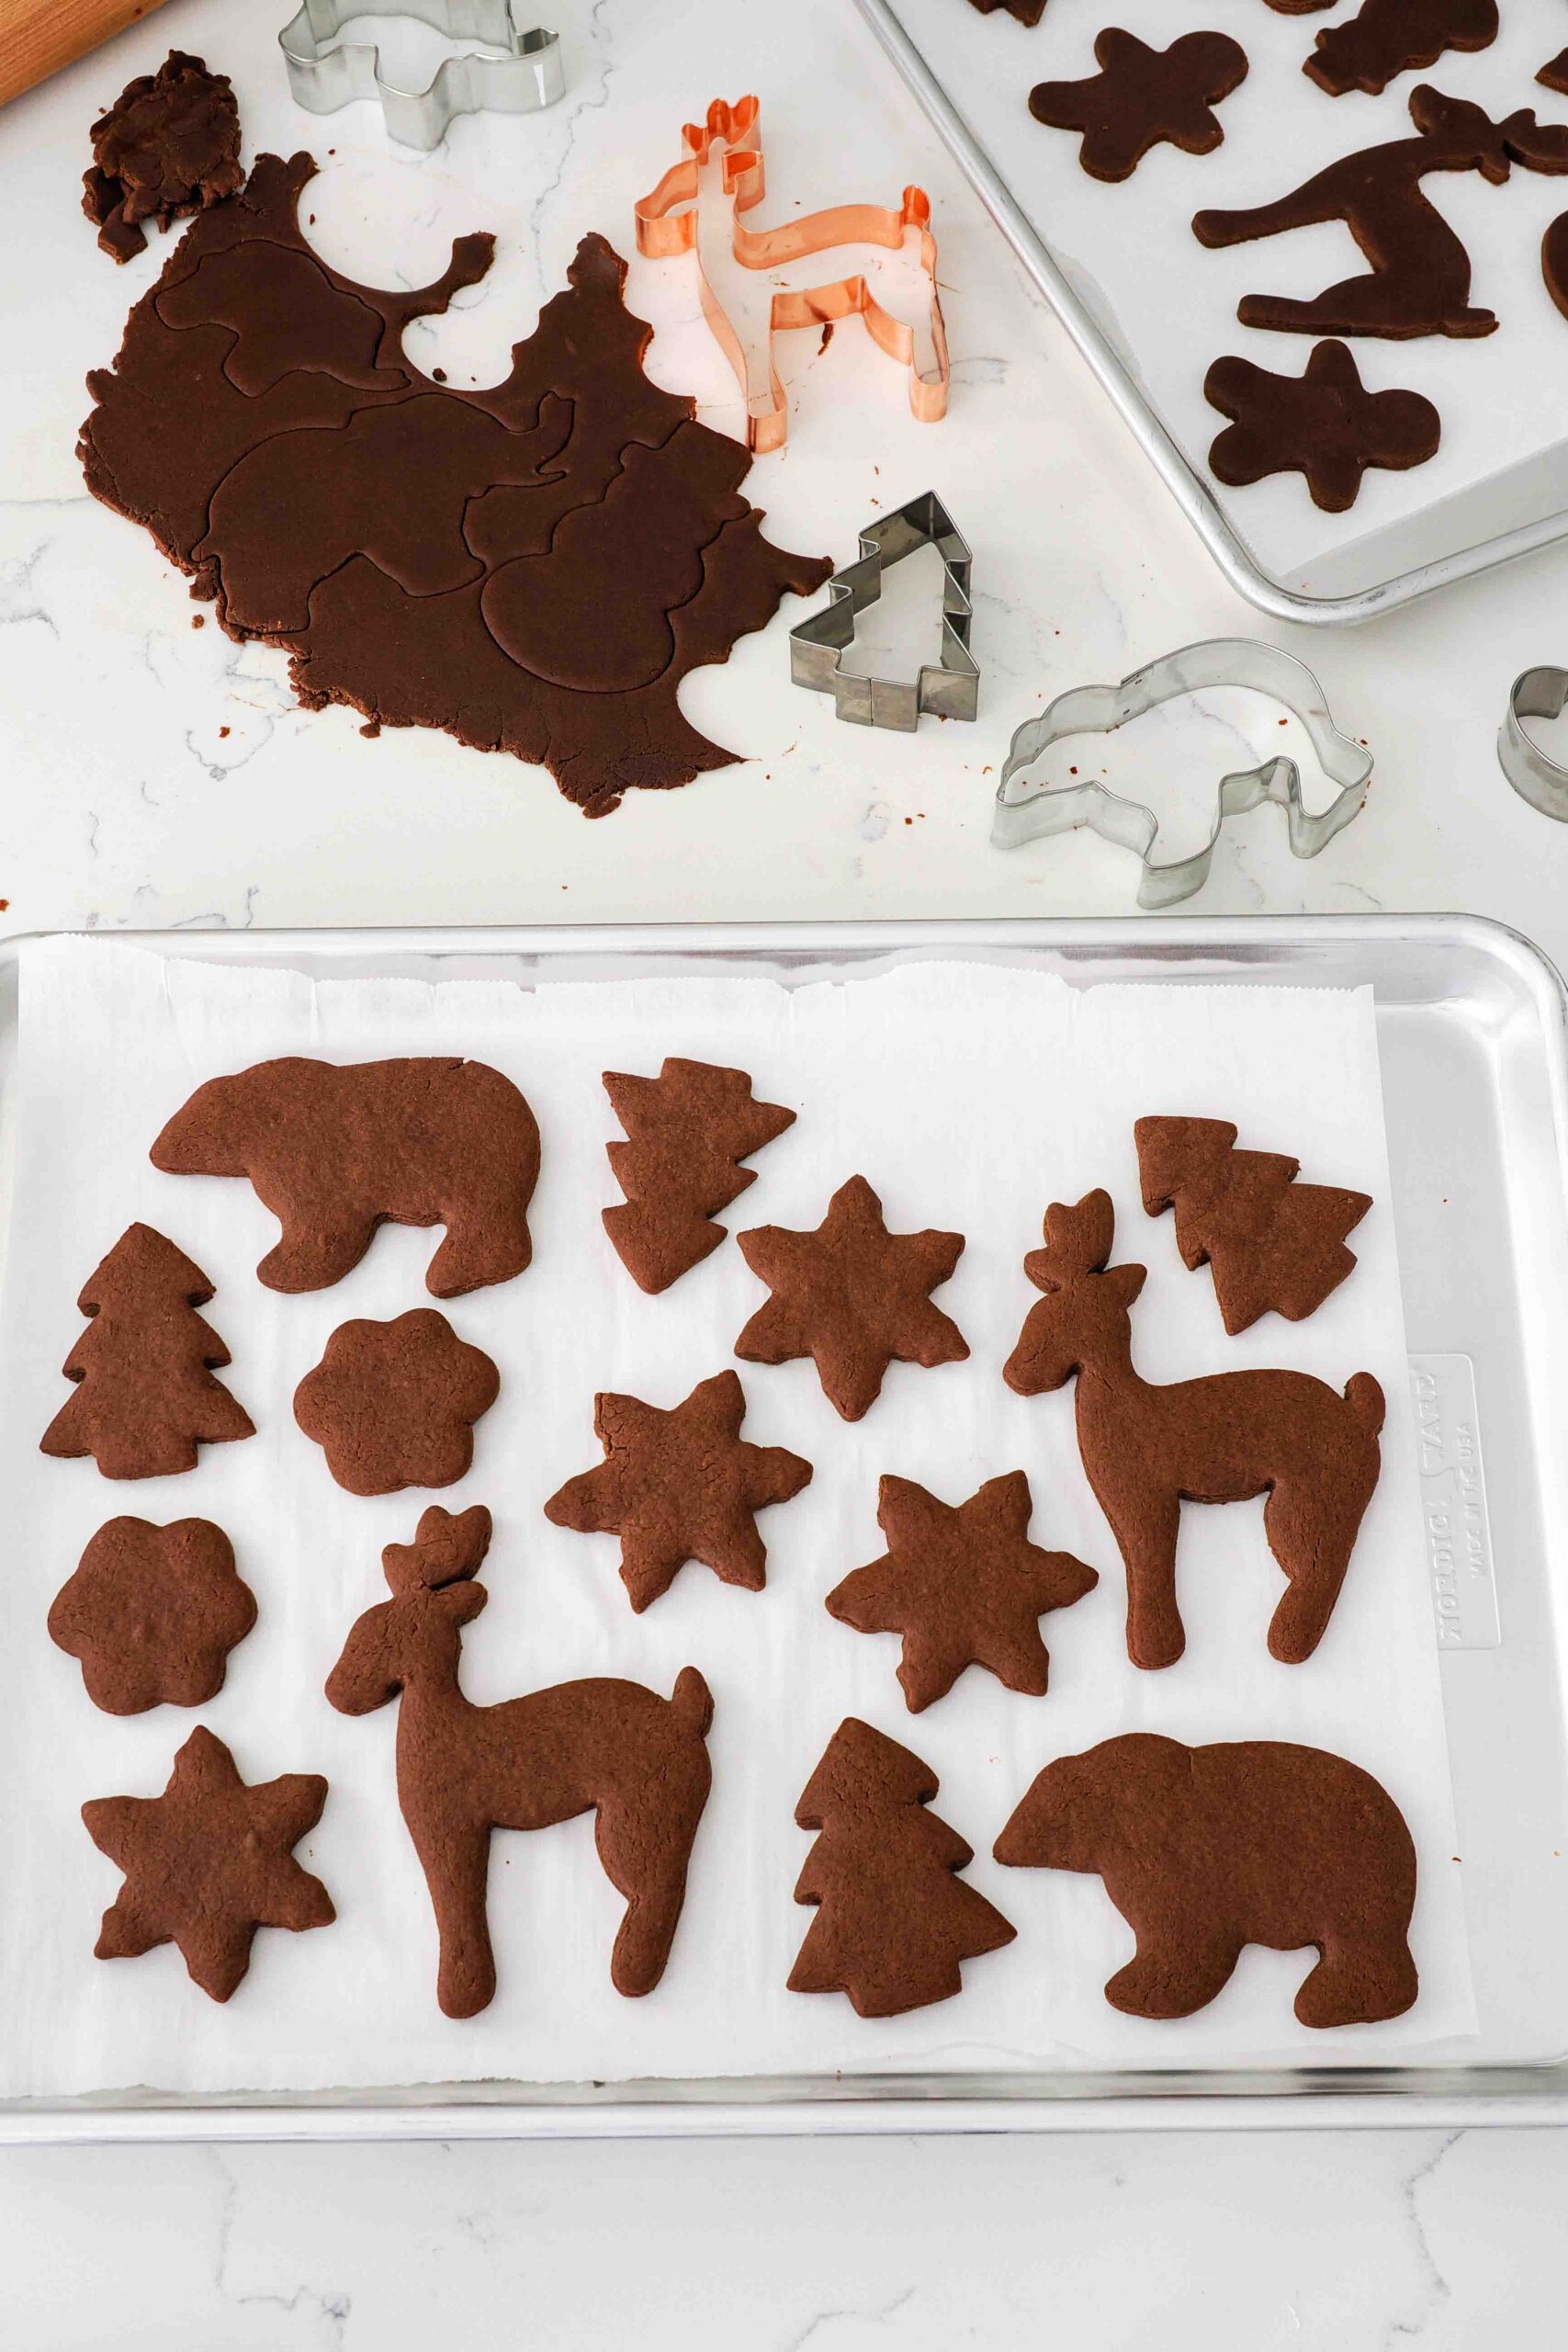 Baked chocolate gingerbread cookies on a baking sheet.